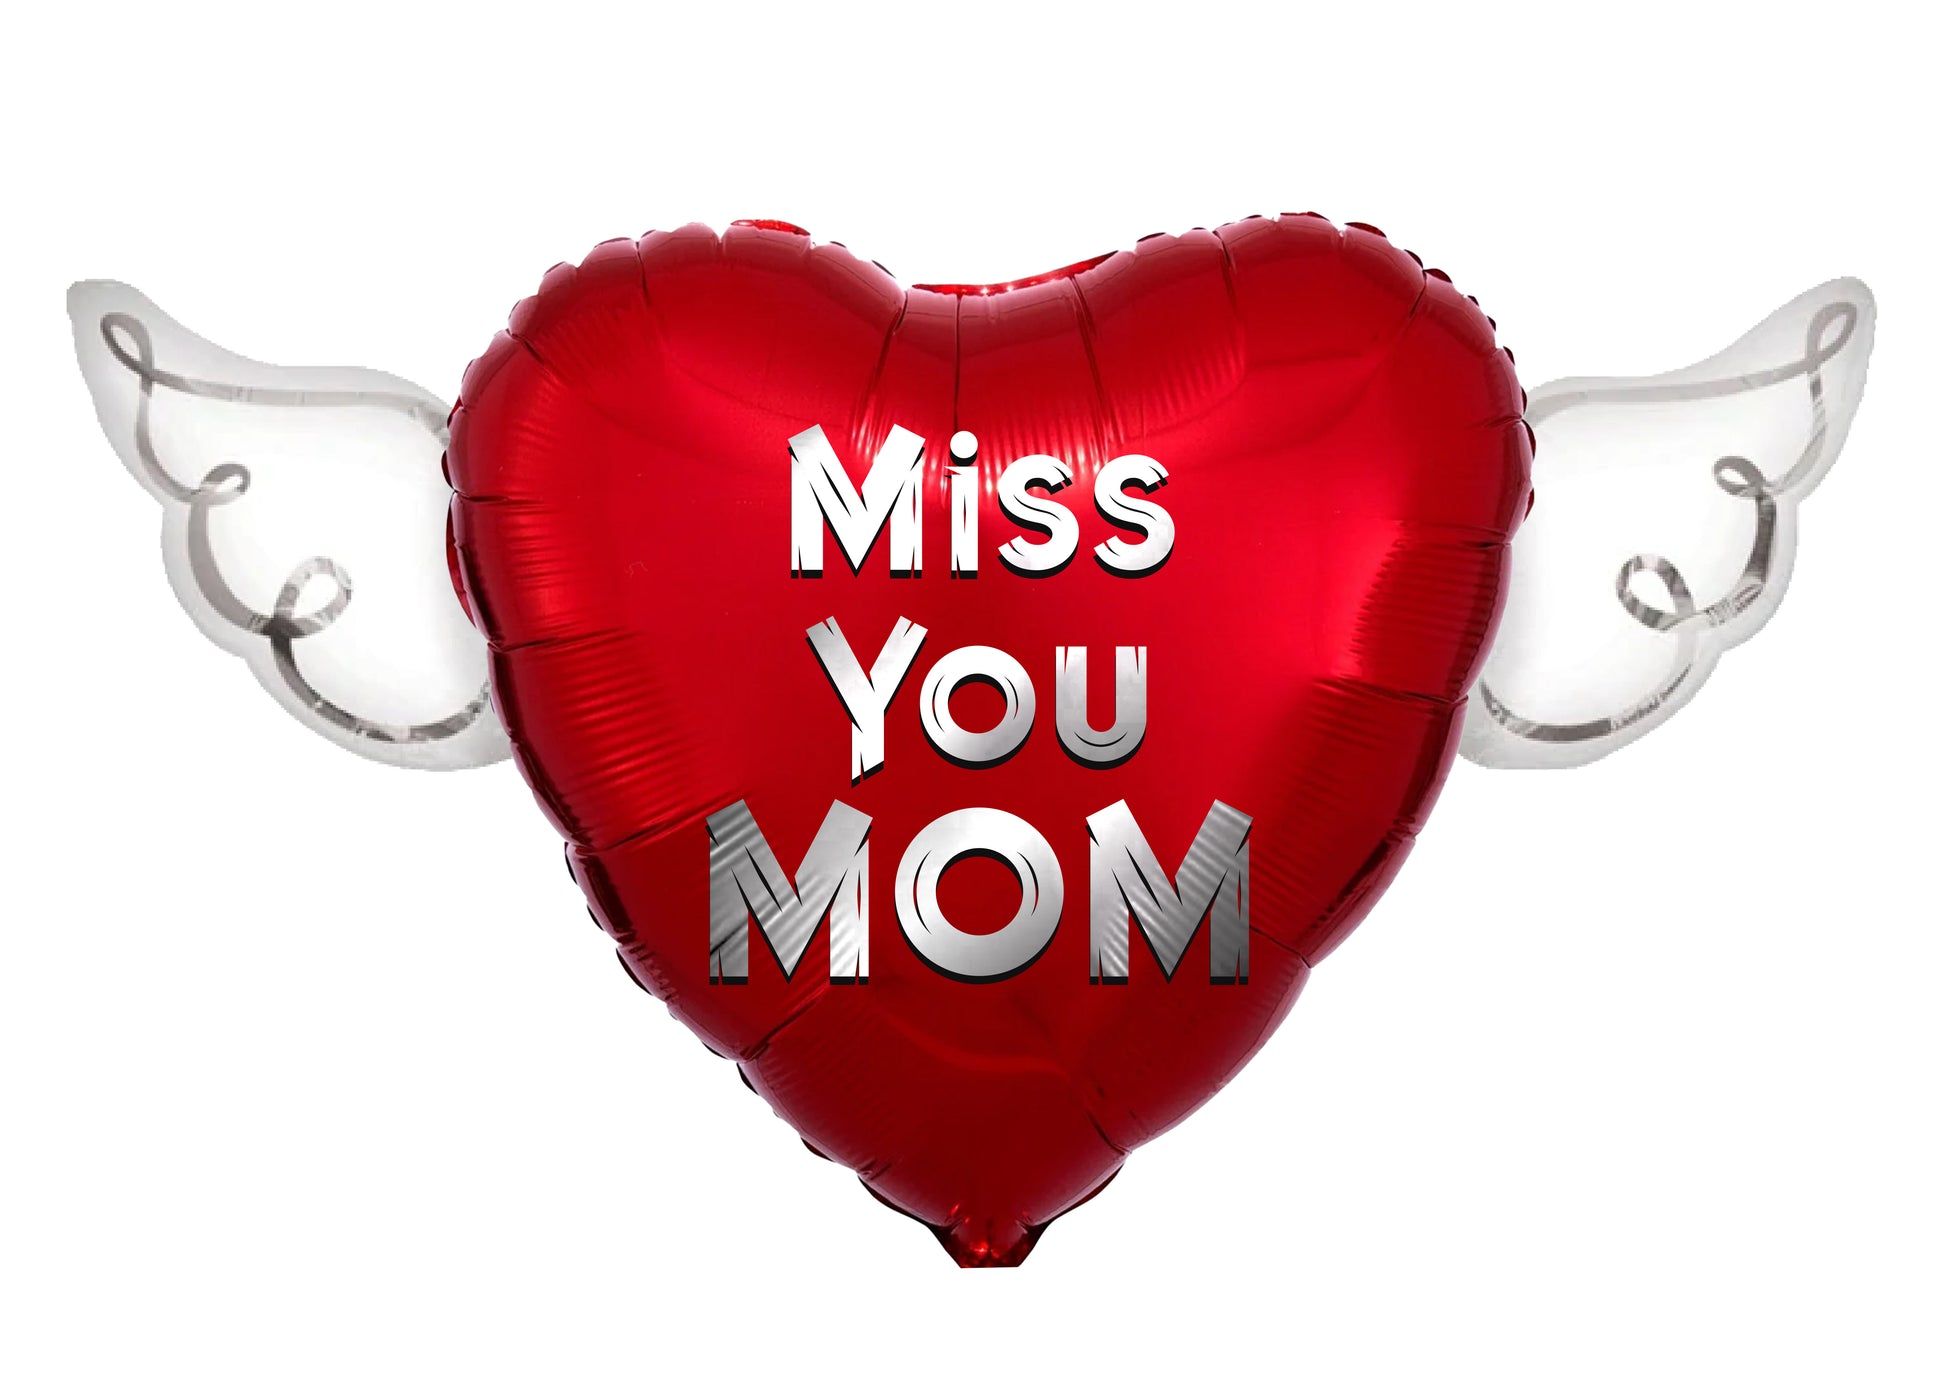 Miss You Mom Heavenly Balloons Heart Shaped with angel wings (Red)